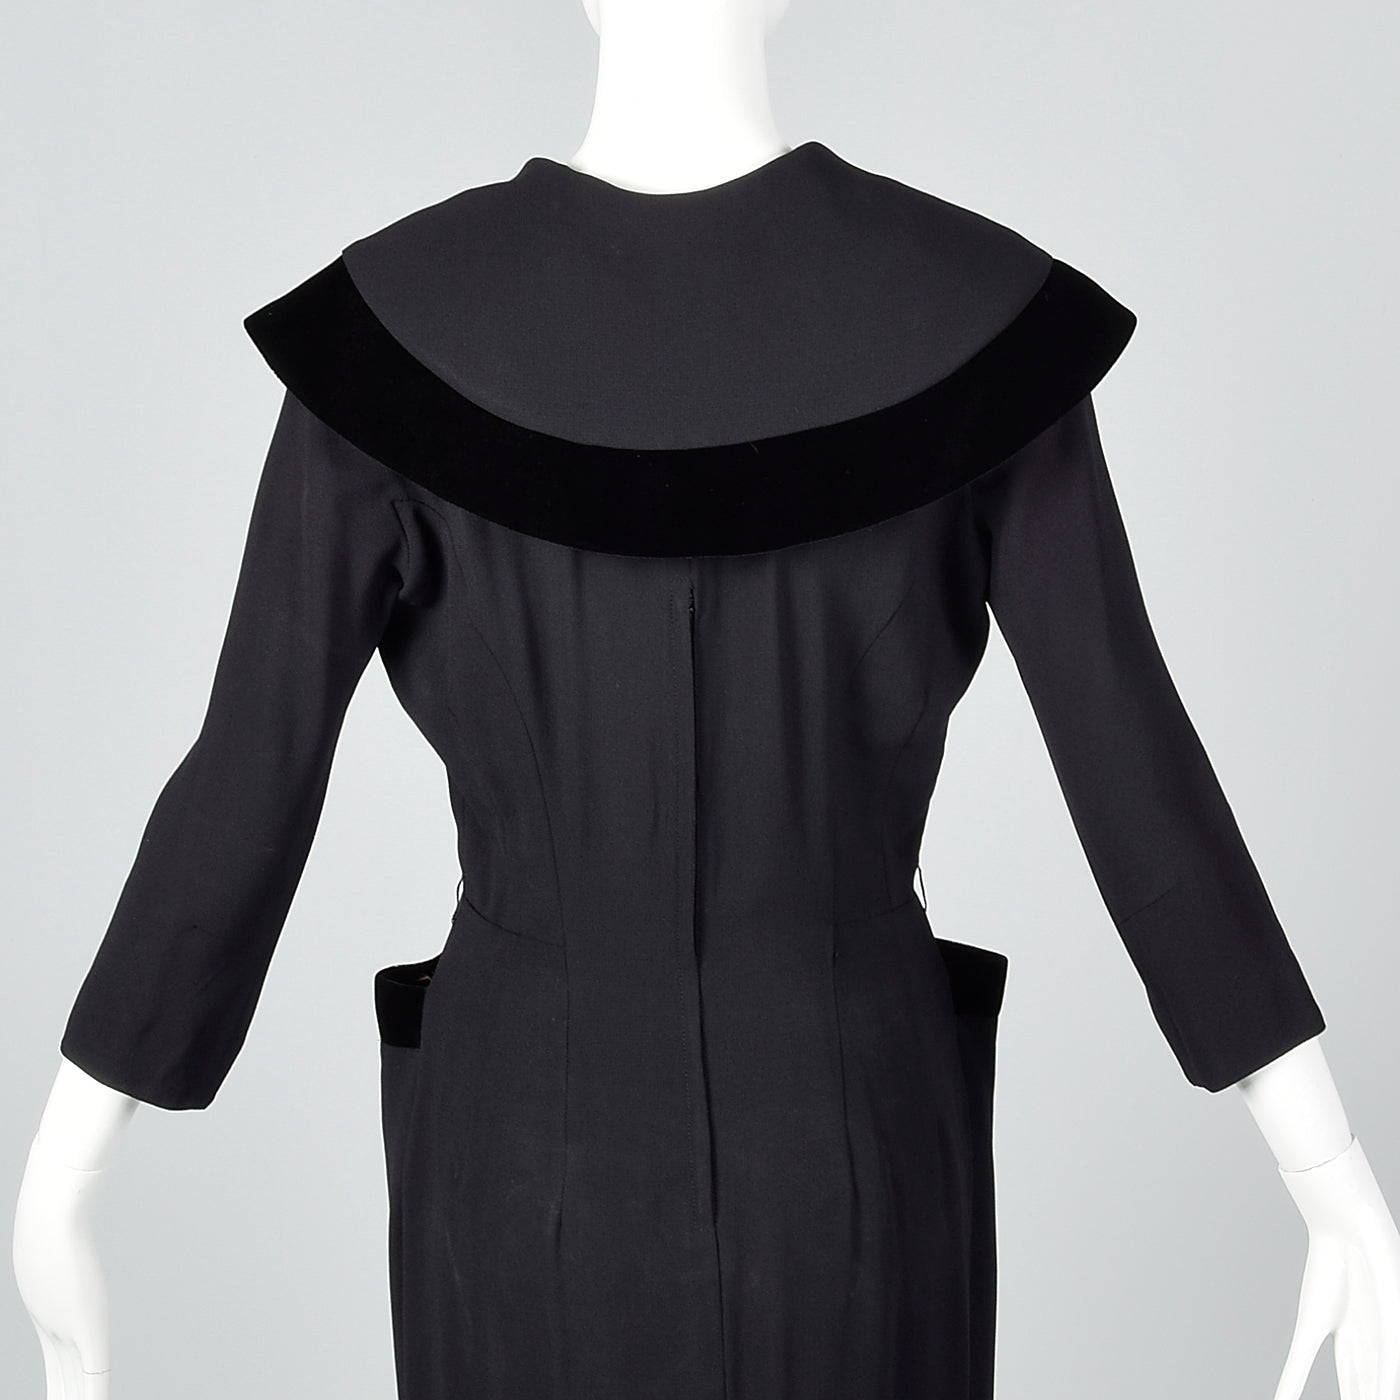 1950s Black Rayon Dress with Velvet Trim and Shawl Collar